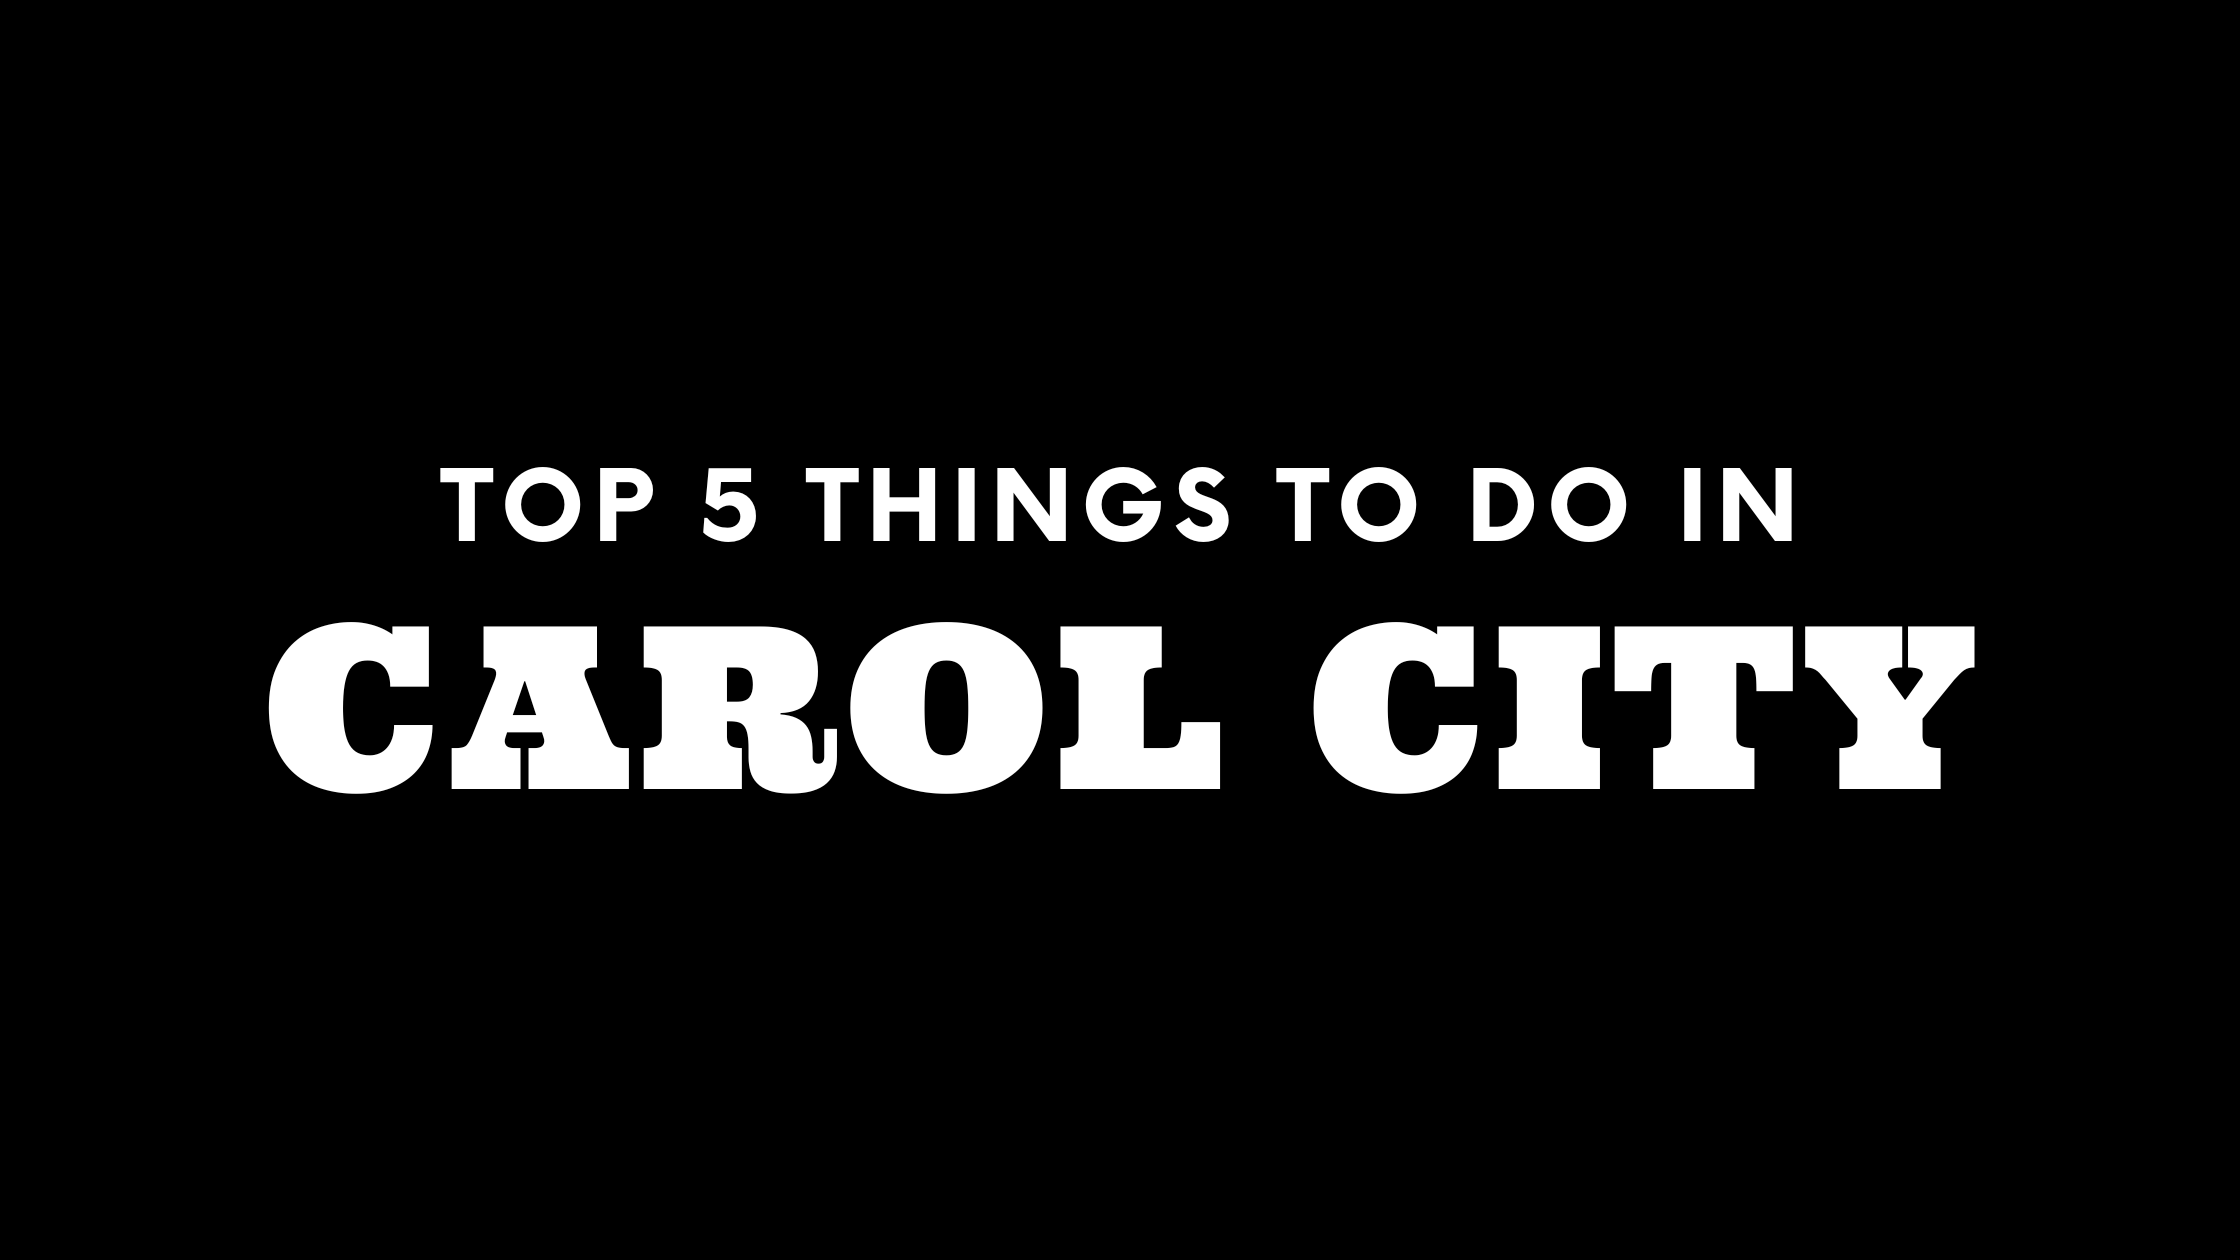 Top 5 Things To Do in Carol City